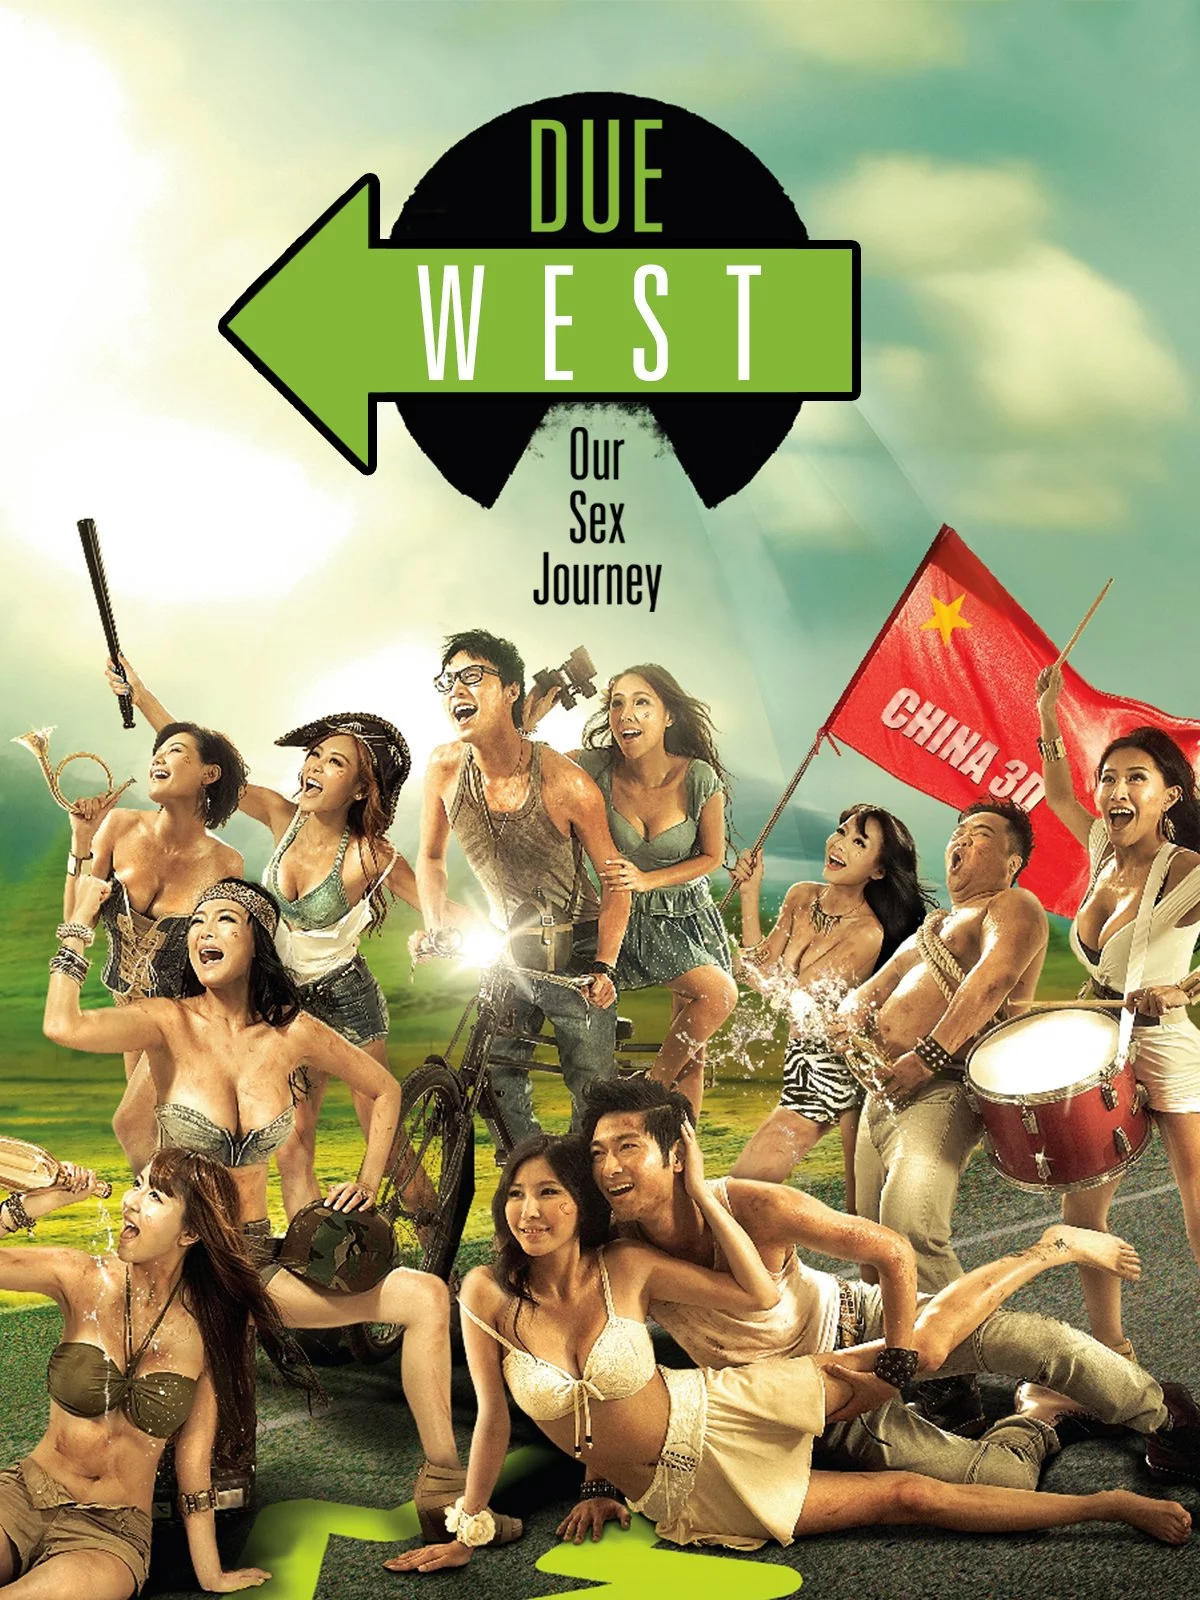 Due West Our Sex Journey (2012) – Full Movie 1080p